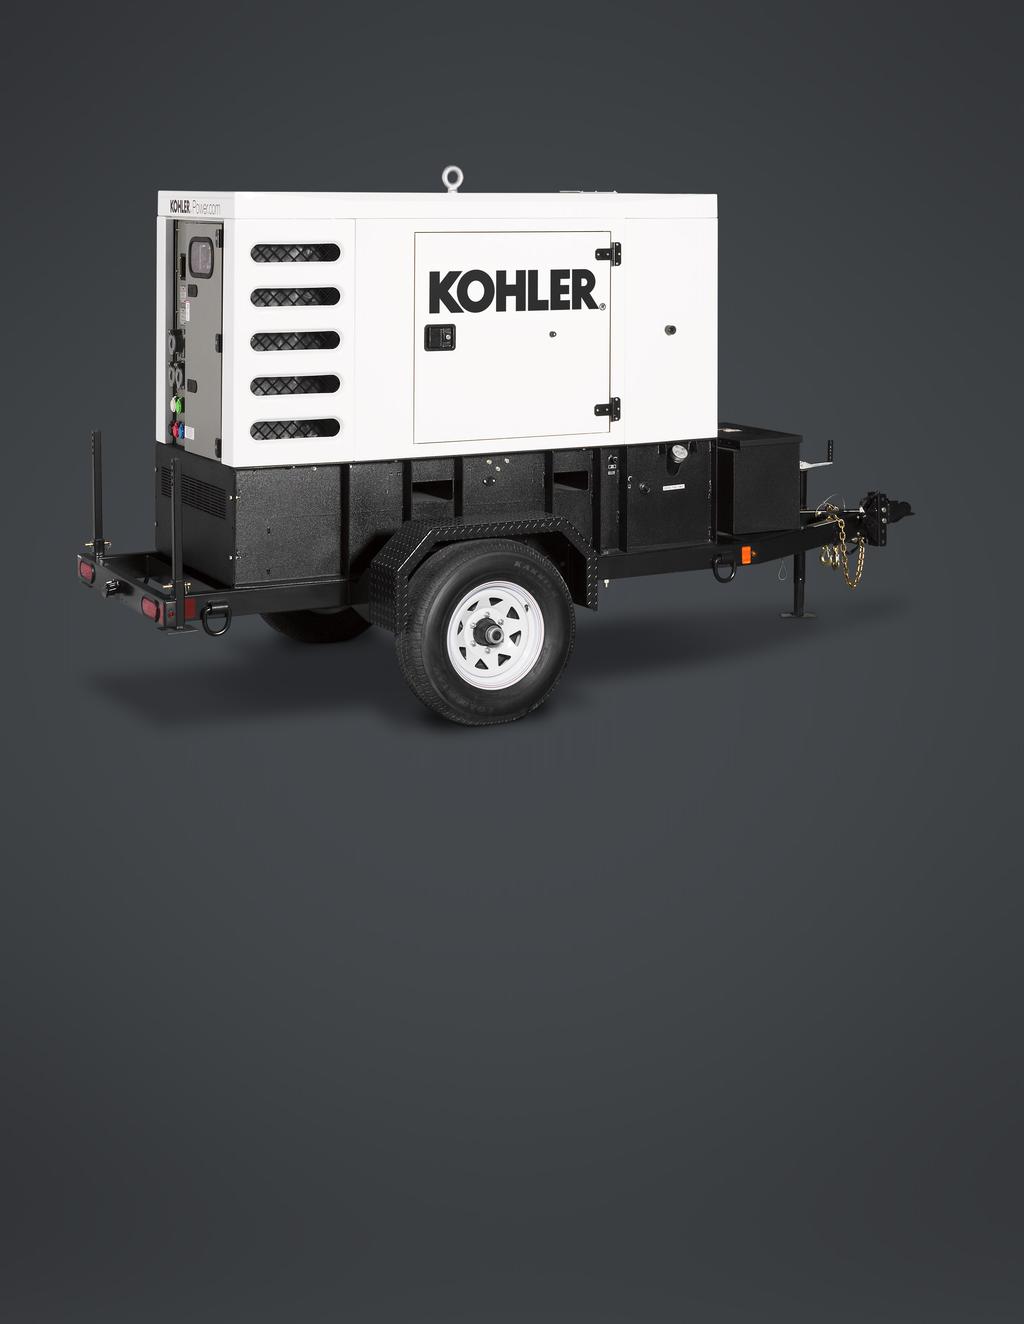 MODELS 35REOZT4 / 45REOZT4 DIESEL MOBILE GENERATORS WITH KOHLER DIESEL KDI ENGINES When it comes to creating heavy-duty power for demanding applications, we have an engine for the future: KOHLER